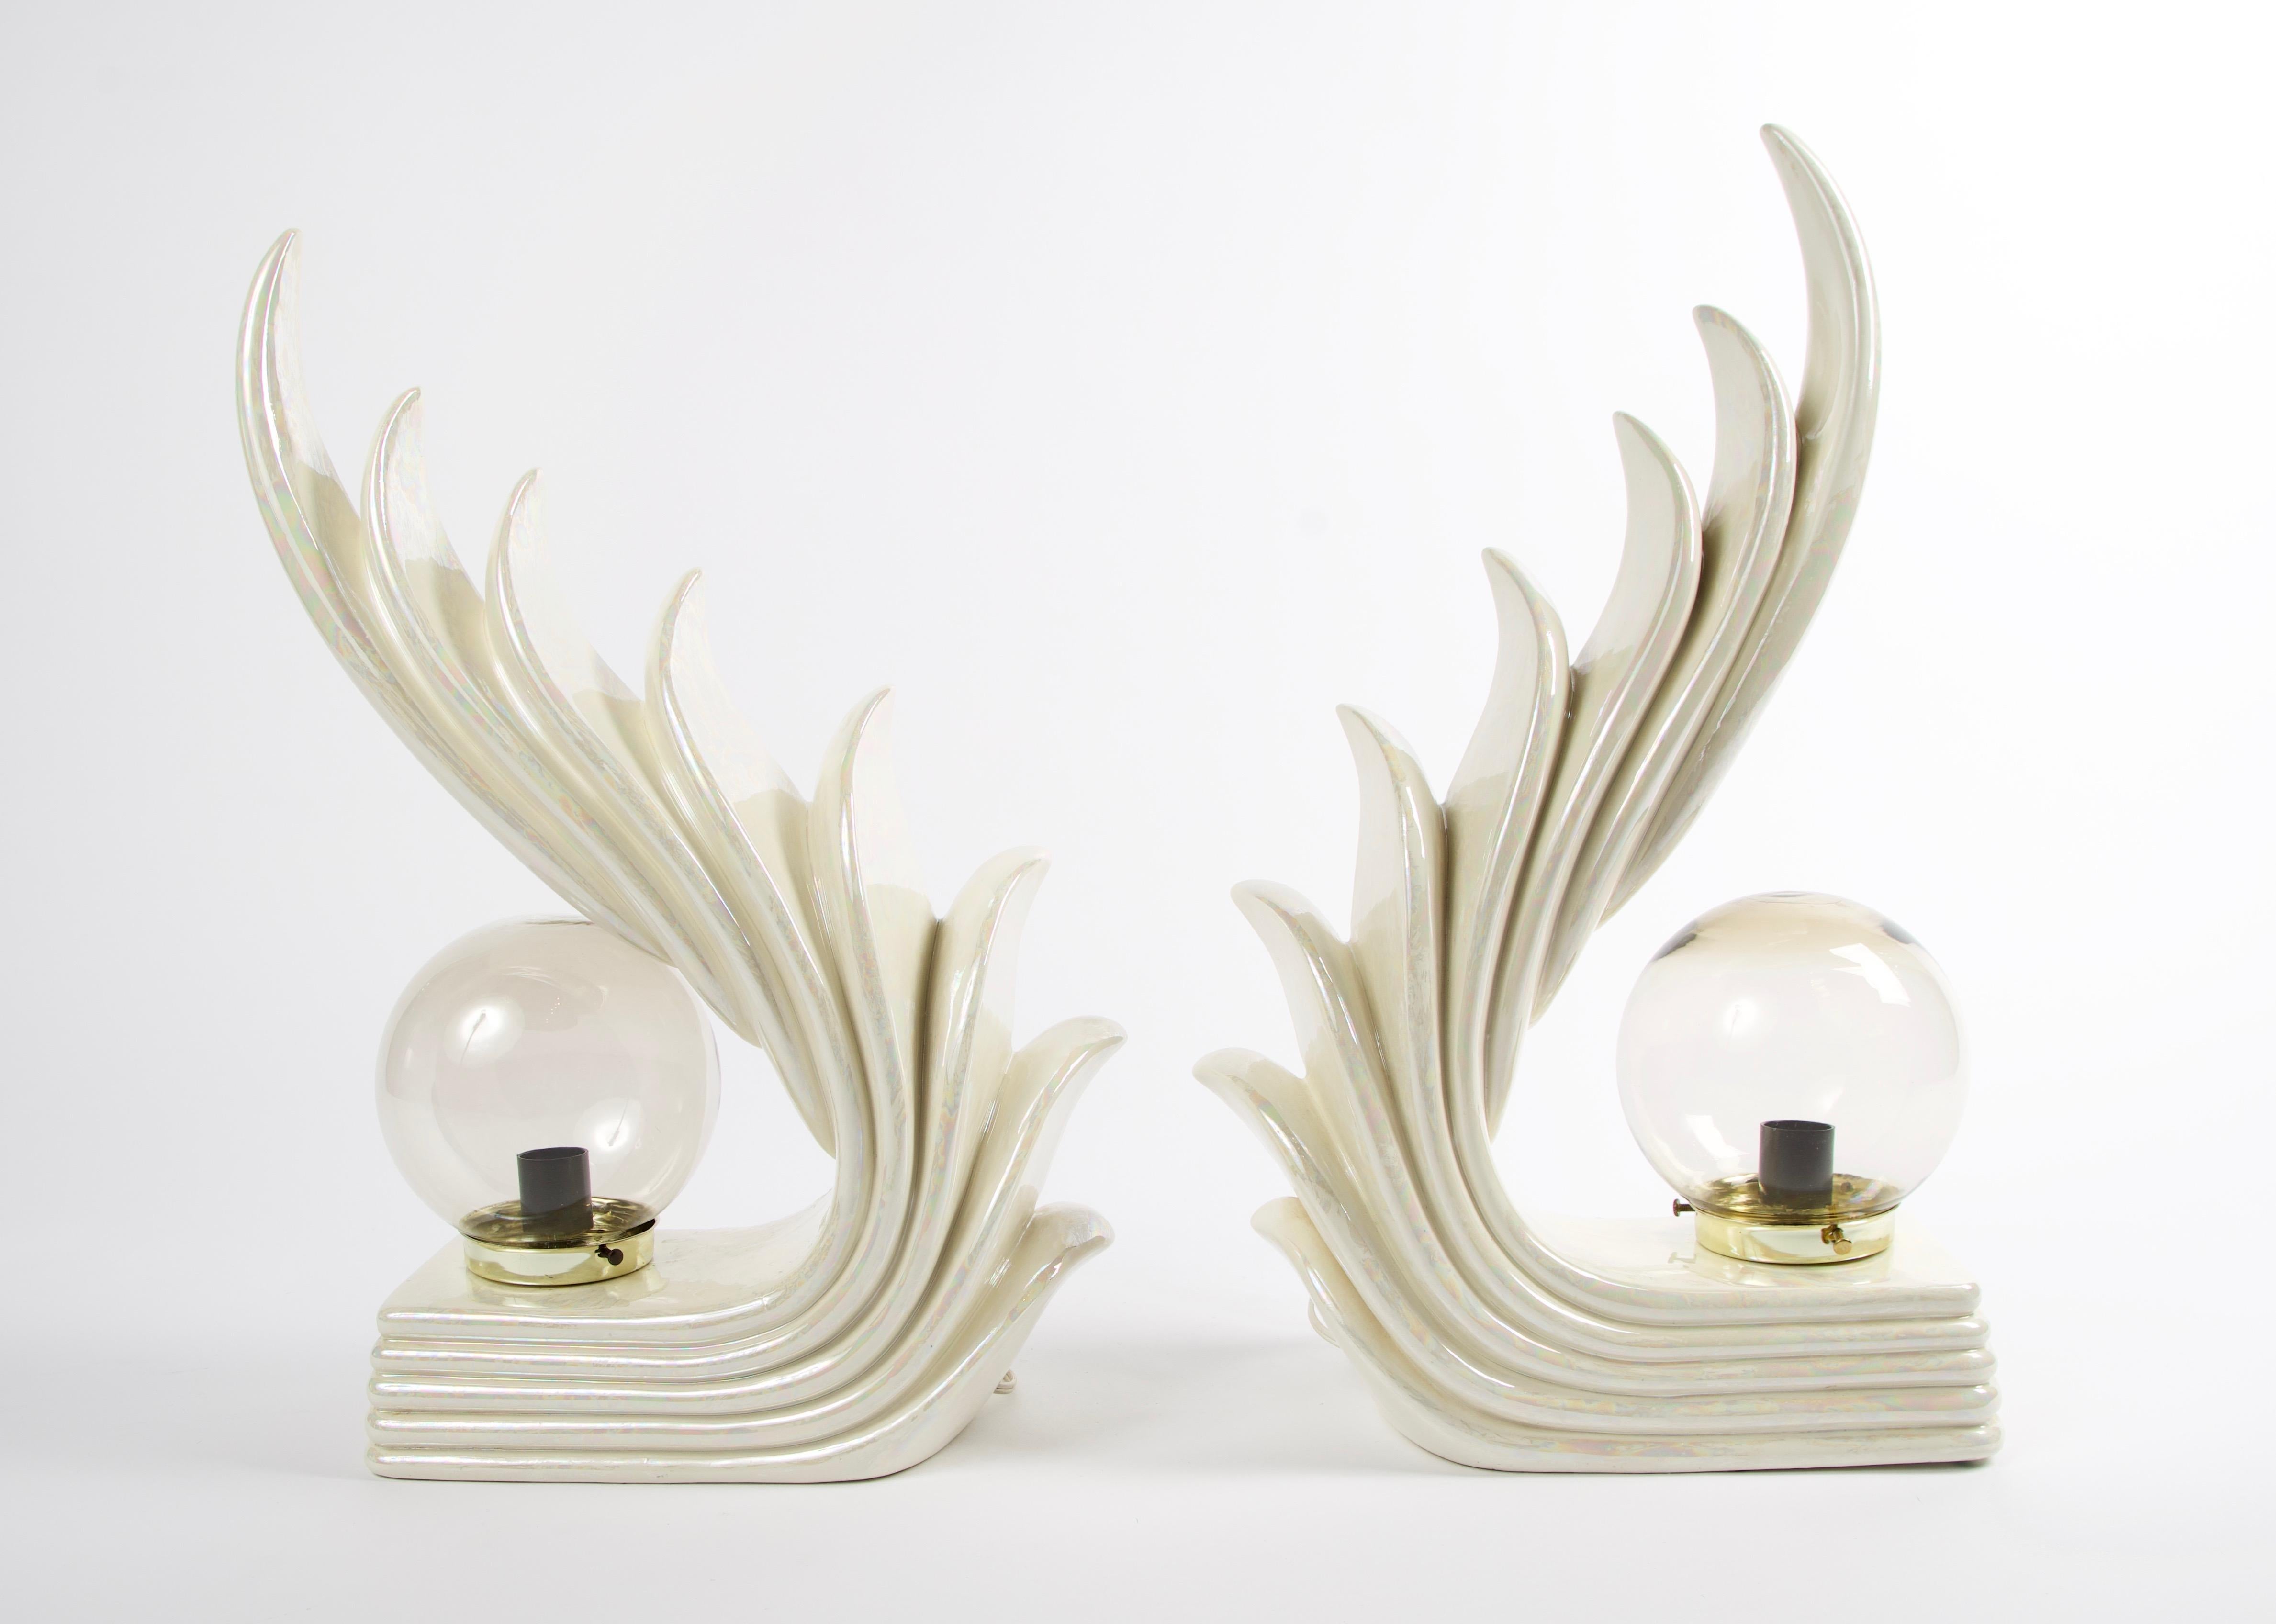 Stunning pair of Art Deco sculptural table lamps with a cascading wave design. These lamps have a cream ceramic glaze with an iridescent finish. The globes are a lightly smoked glass with a brass base. Due to them being handmade there are slight